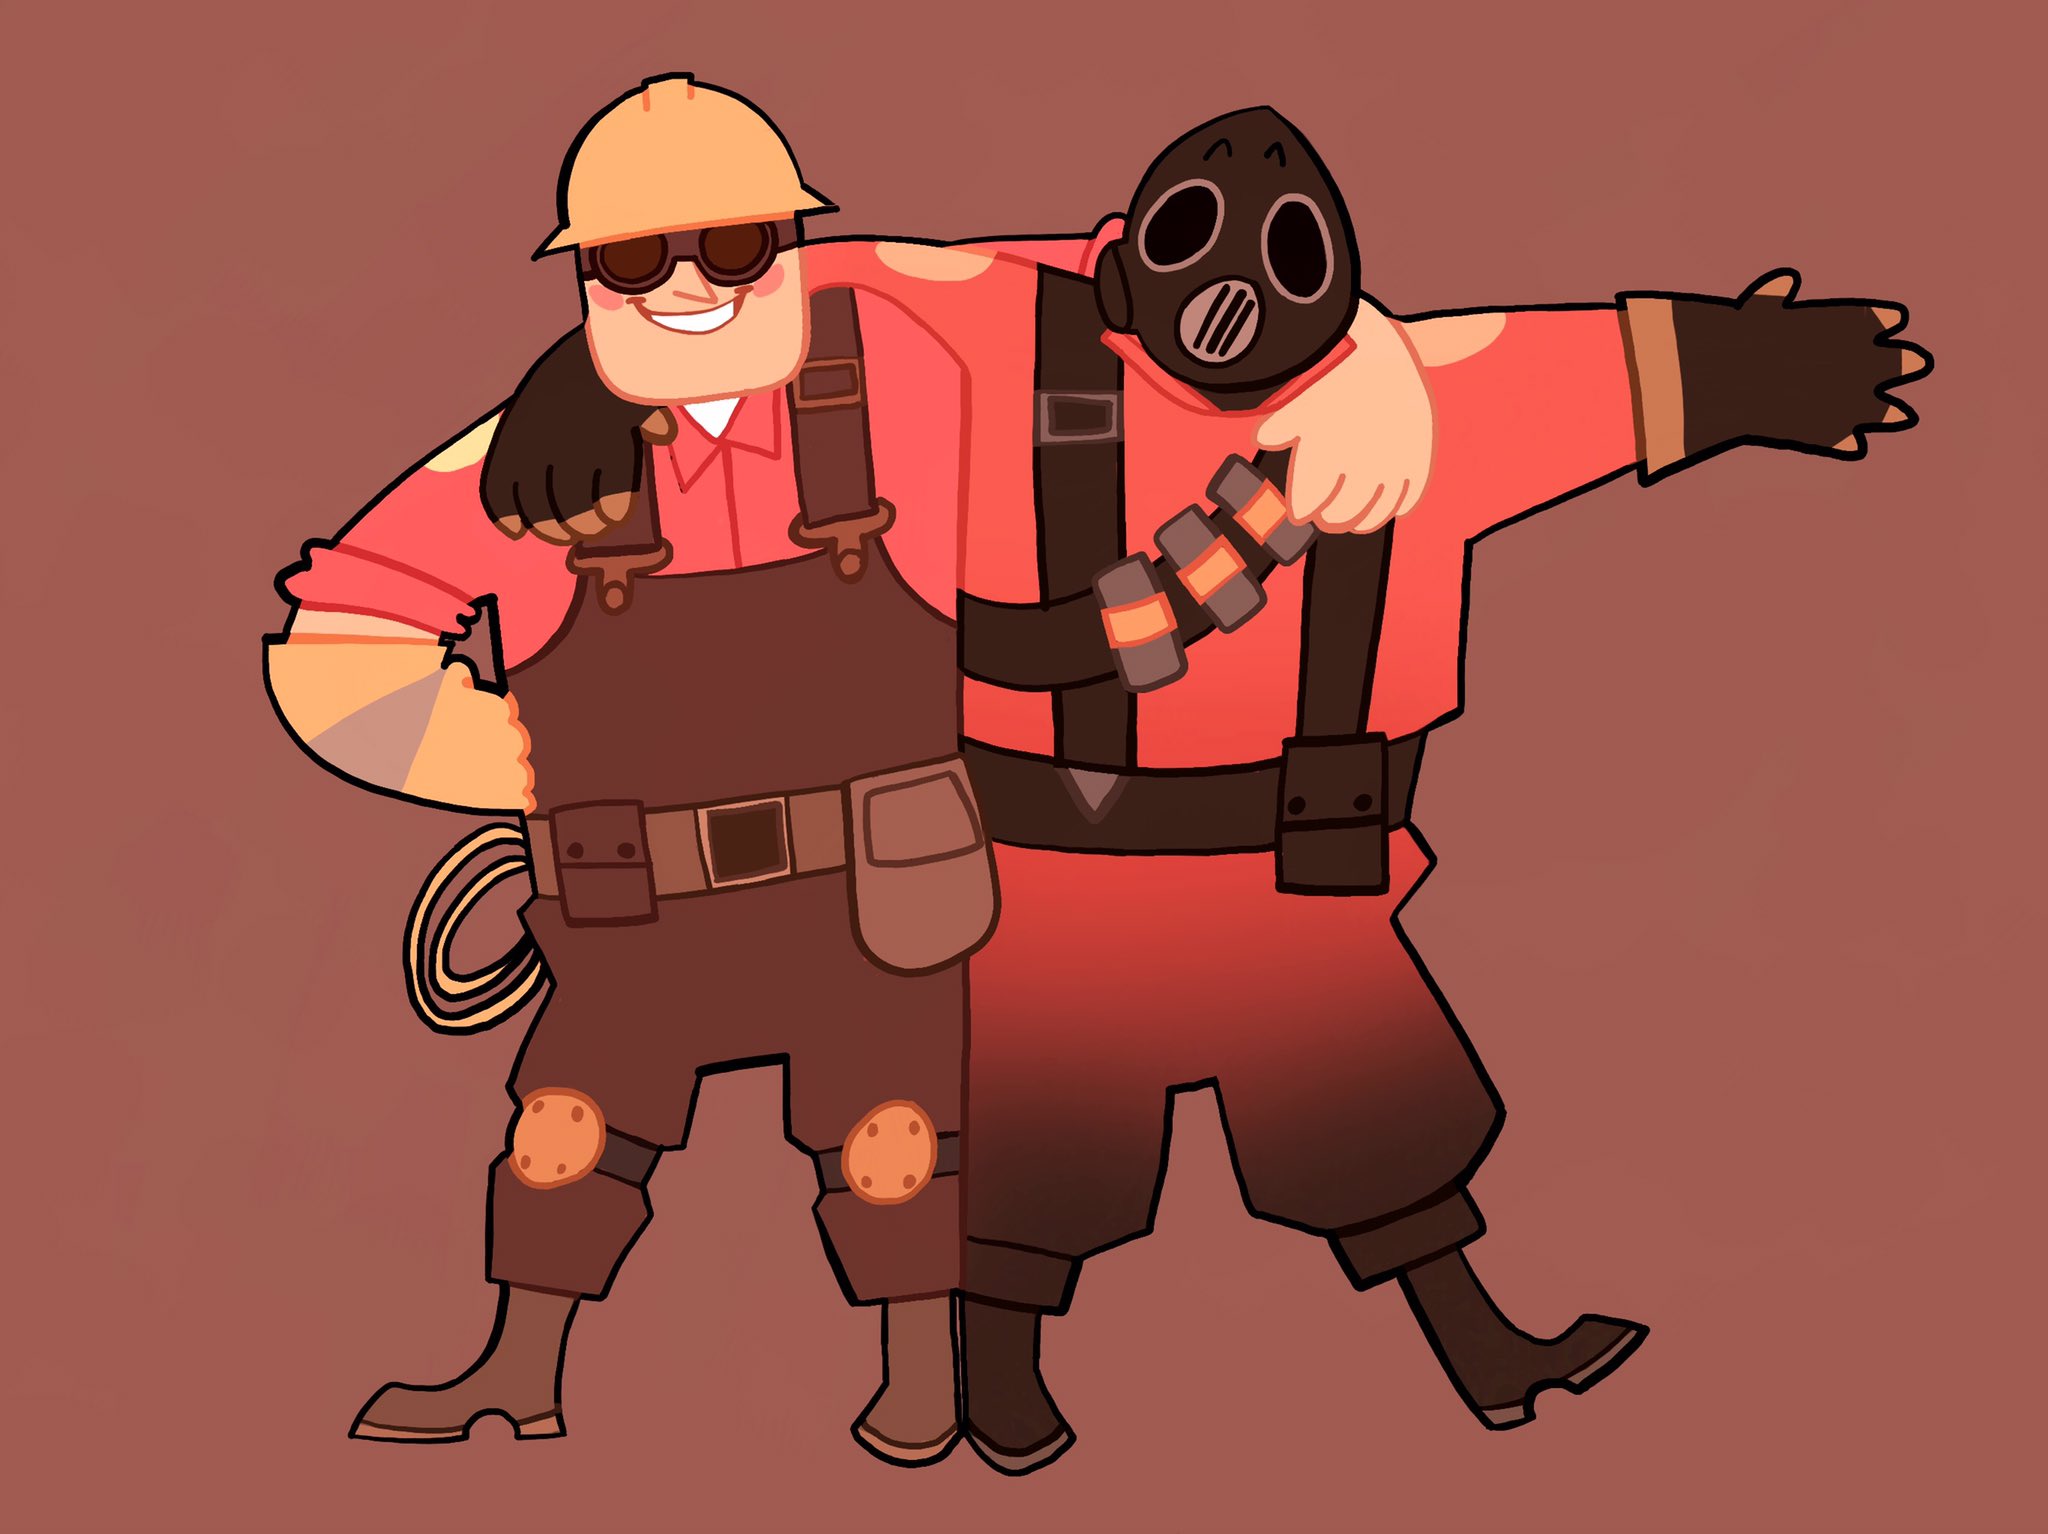 core.void ⚠ ️blood/gore ⚠ on Twitter: "Love those funky dudes #tf2 #ar...